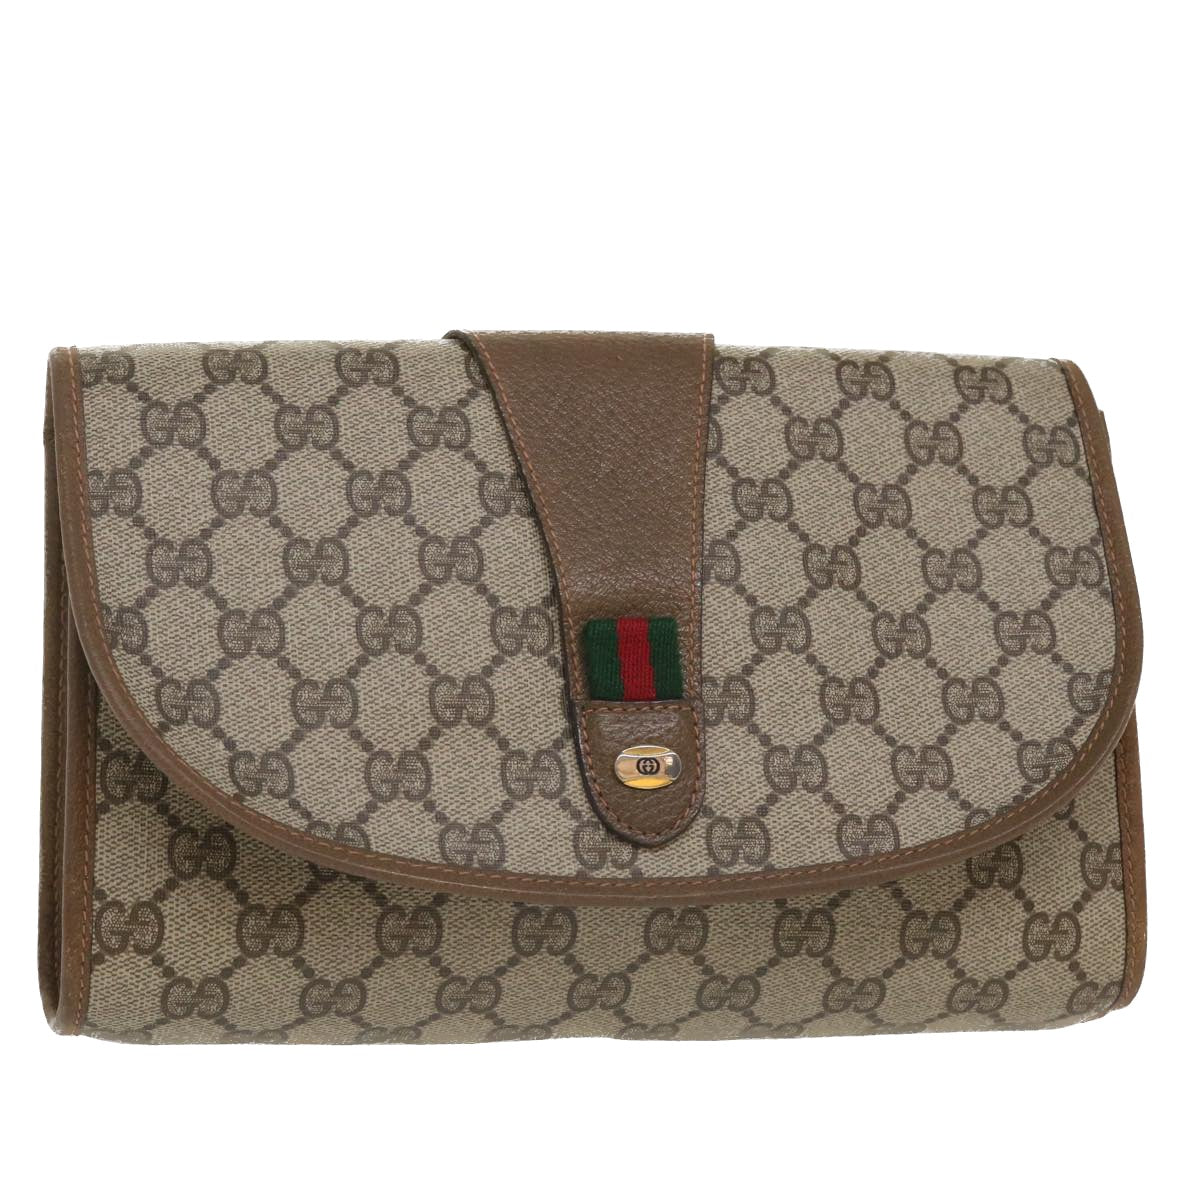 GUCCI GG Canvas Web Sherry Line Clutch Bag Beige Red Green 8901030 Auth ny156